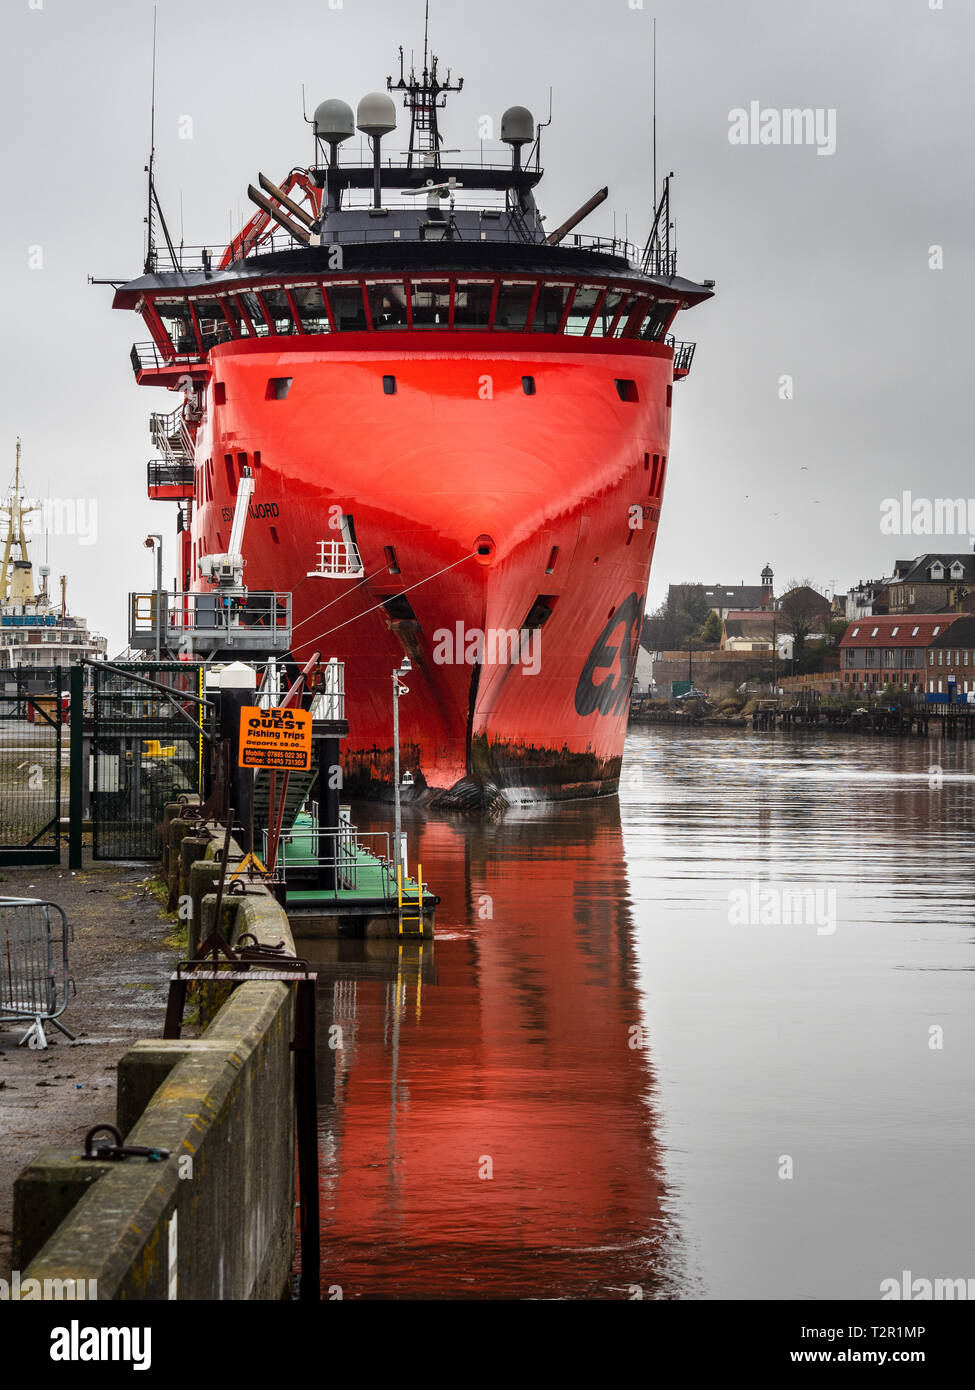 Esvagt Njord - purpose built 84-metre Service Operations Vessel SOV for the Statoil Dudgeon Offshore Wind Farm docked in Great Yarmouth Port UK. Stock Photo